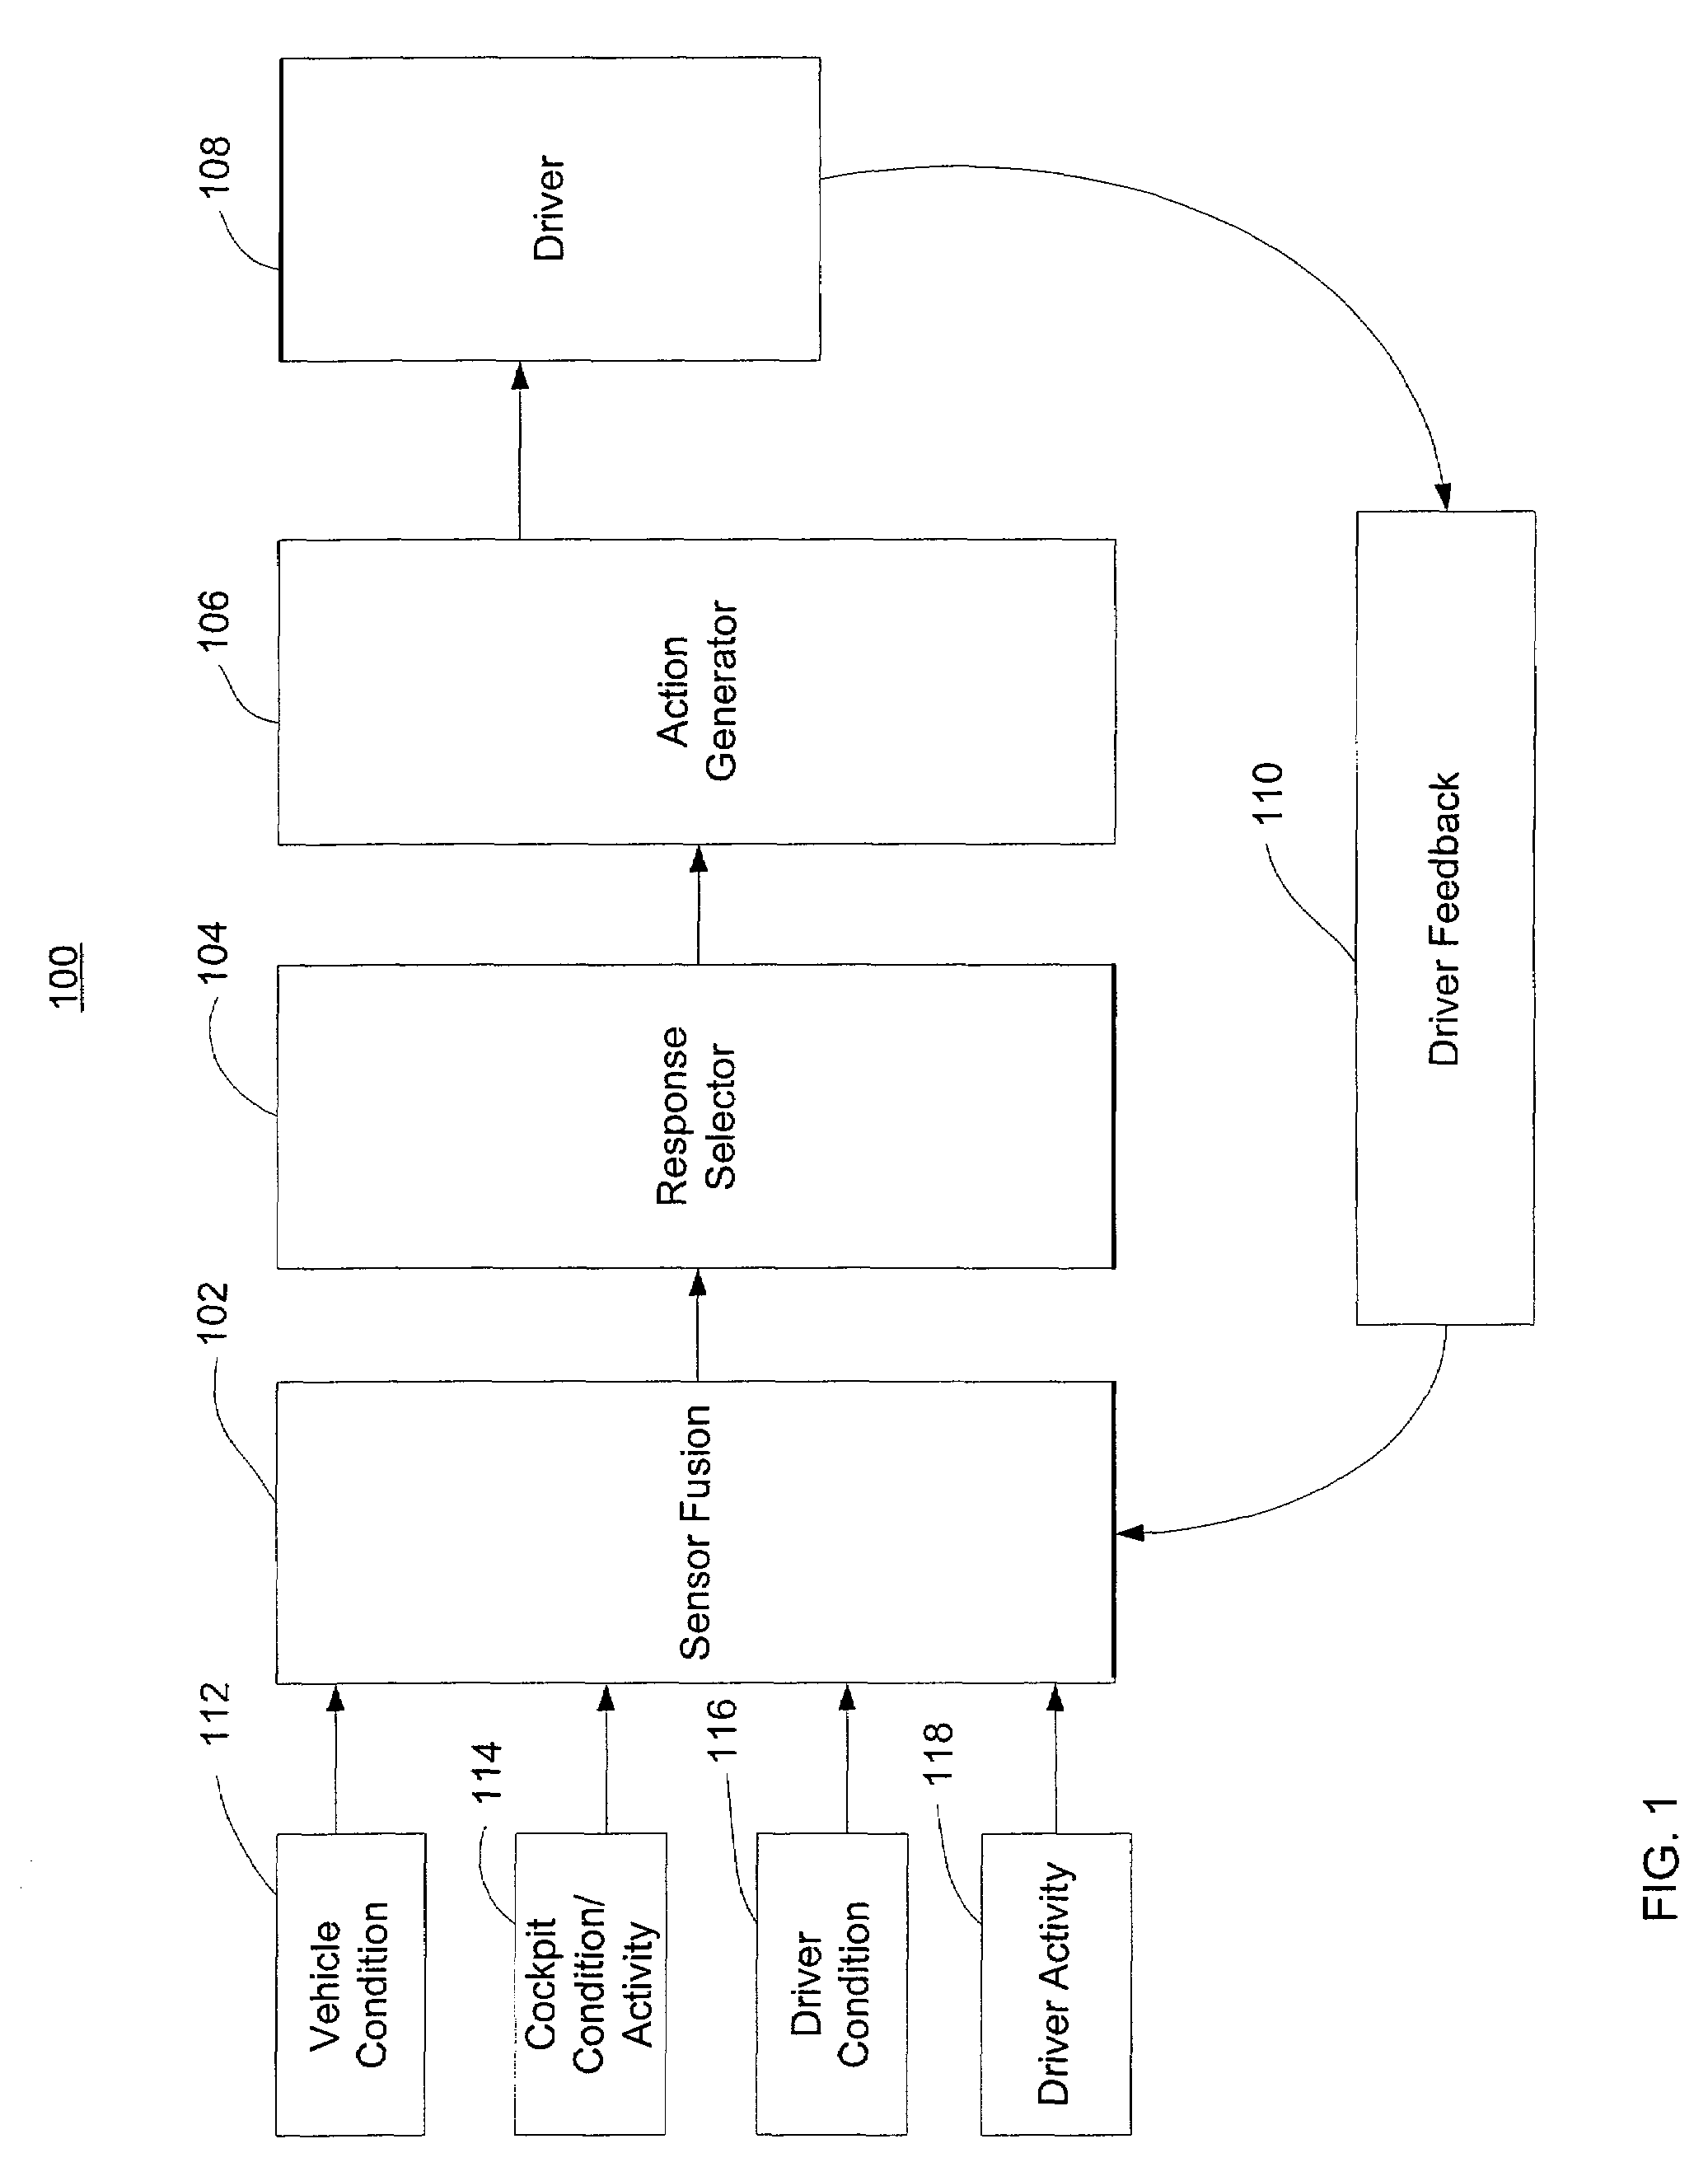 Method and apparatus for improving vehicle operator performance